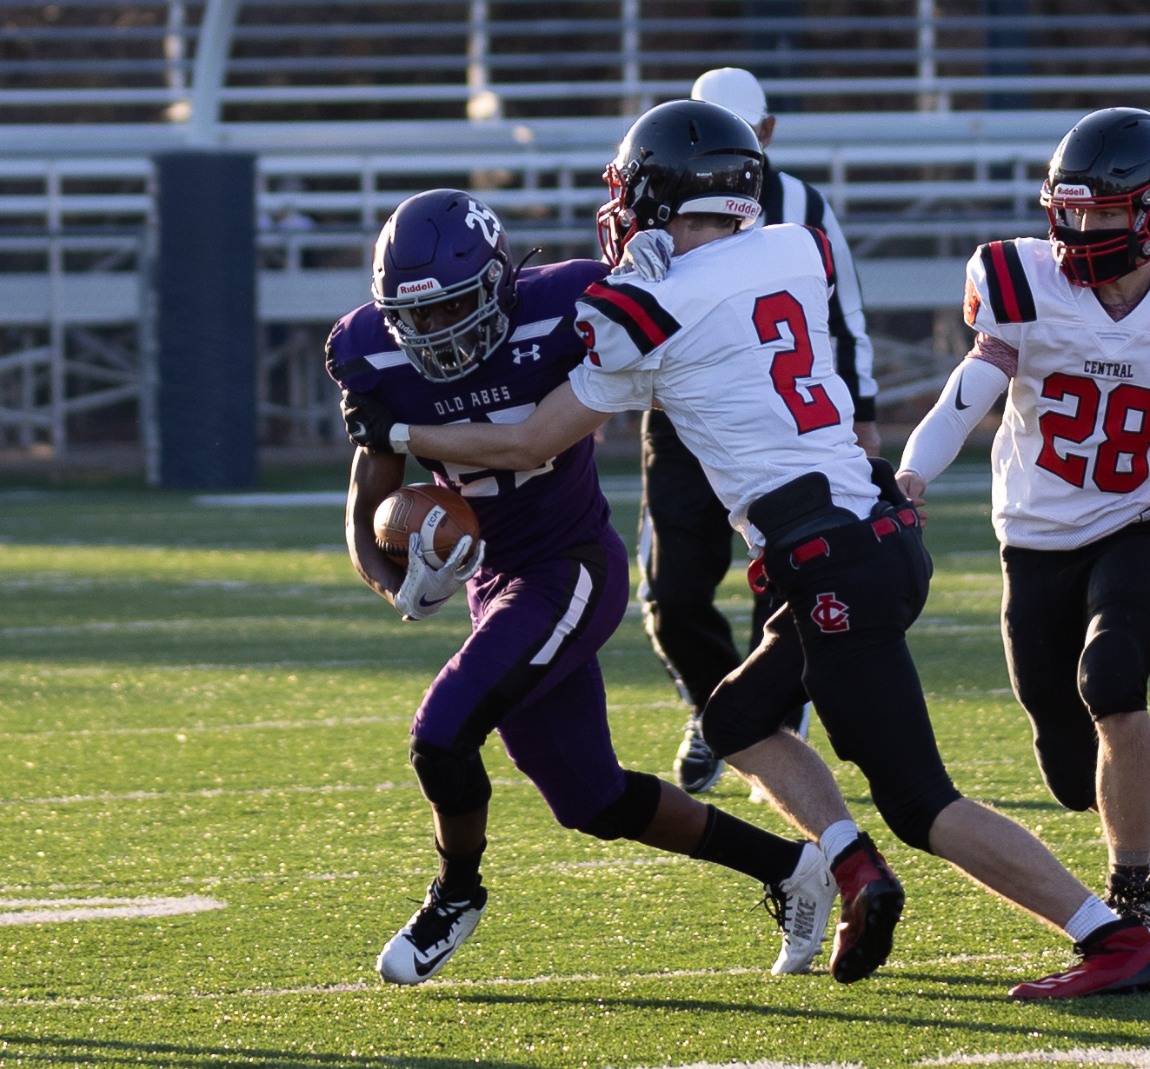 Eau-Claire-Memorial-JV-Football-LaCrosse-Central-at-Home-3-29-21-1195